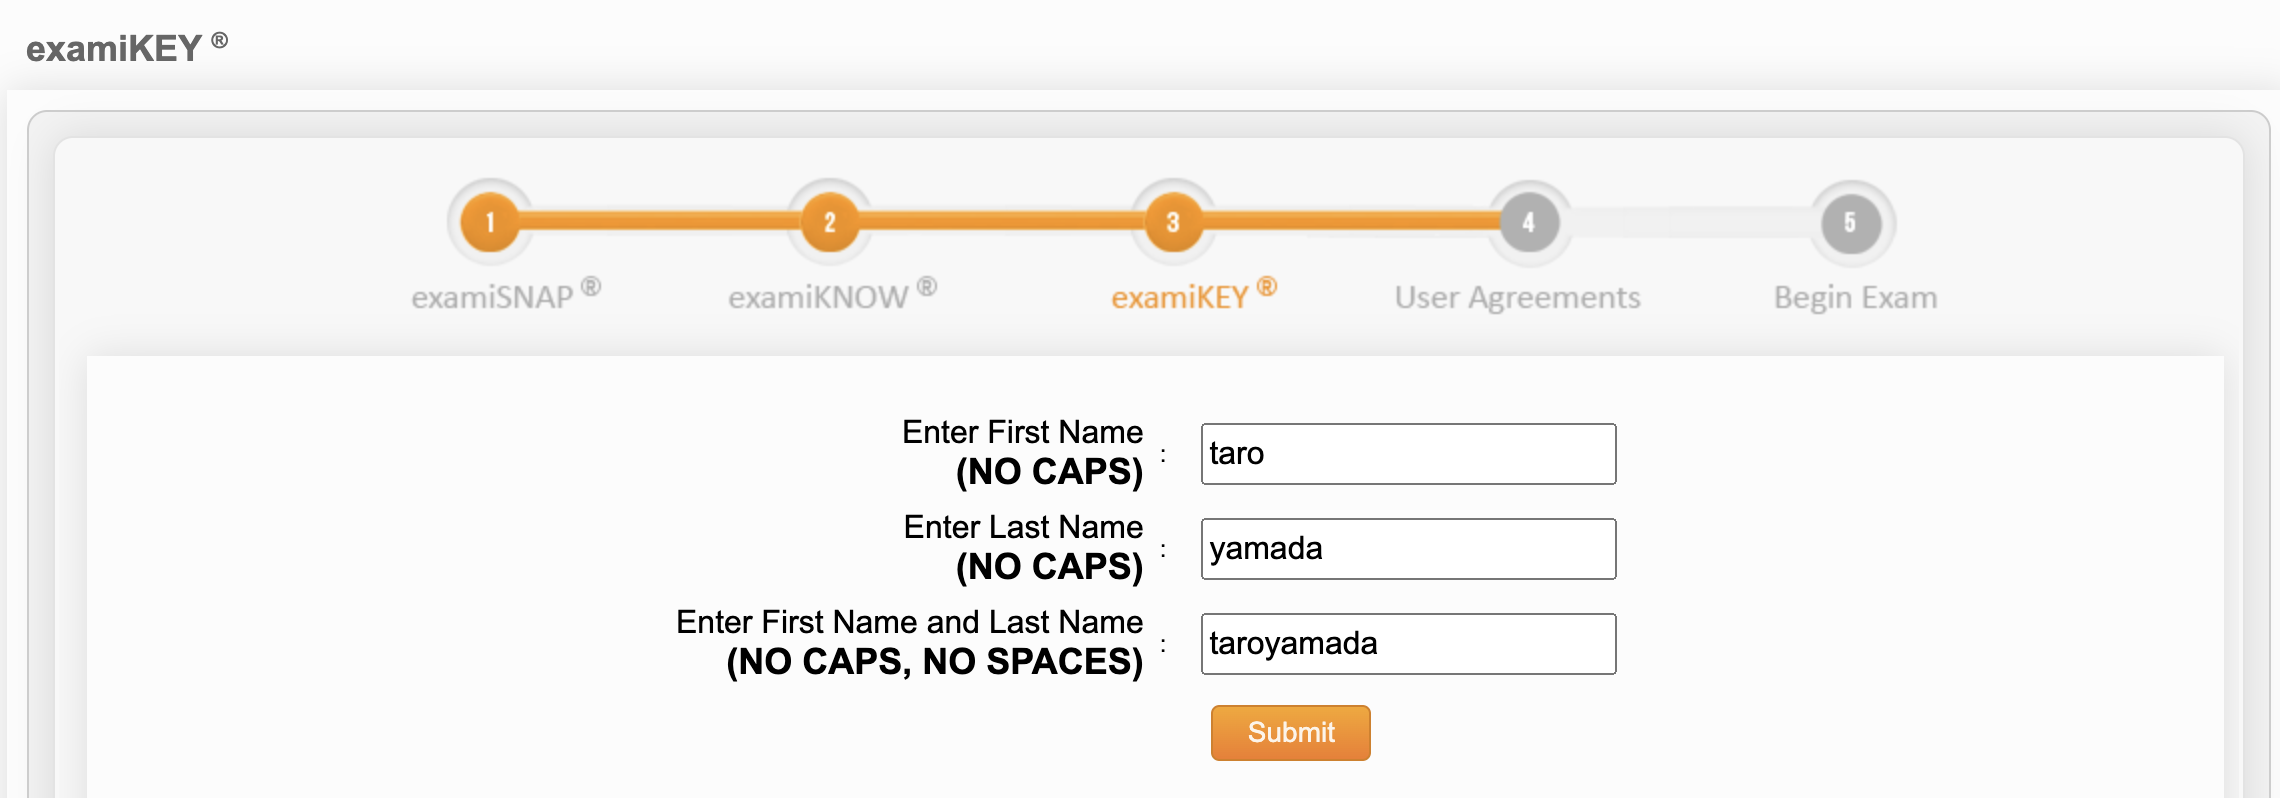 Image of the Exams portal, featuring the ExamiKEY step, previewing the biometric information for first and last name.